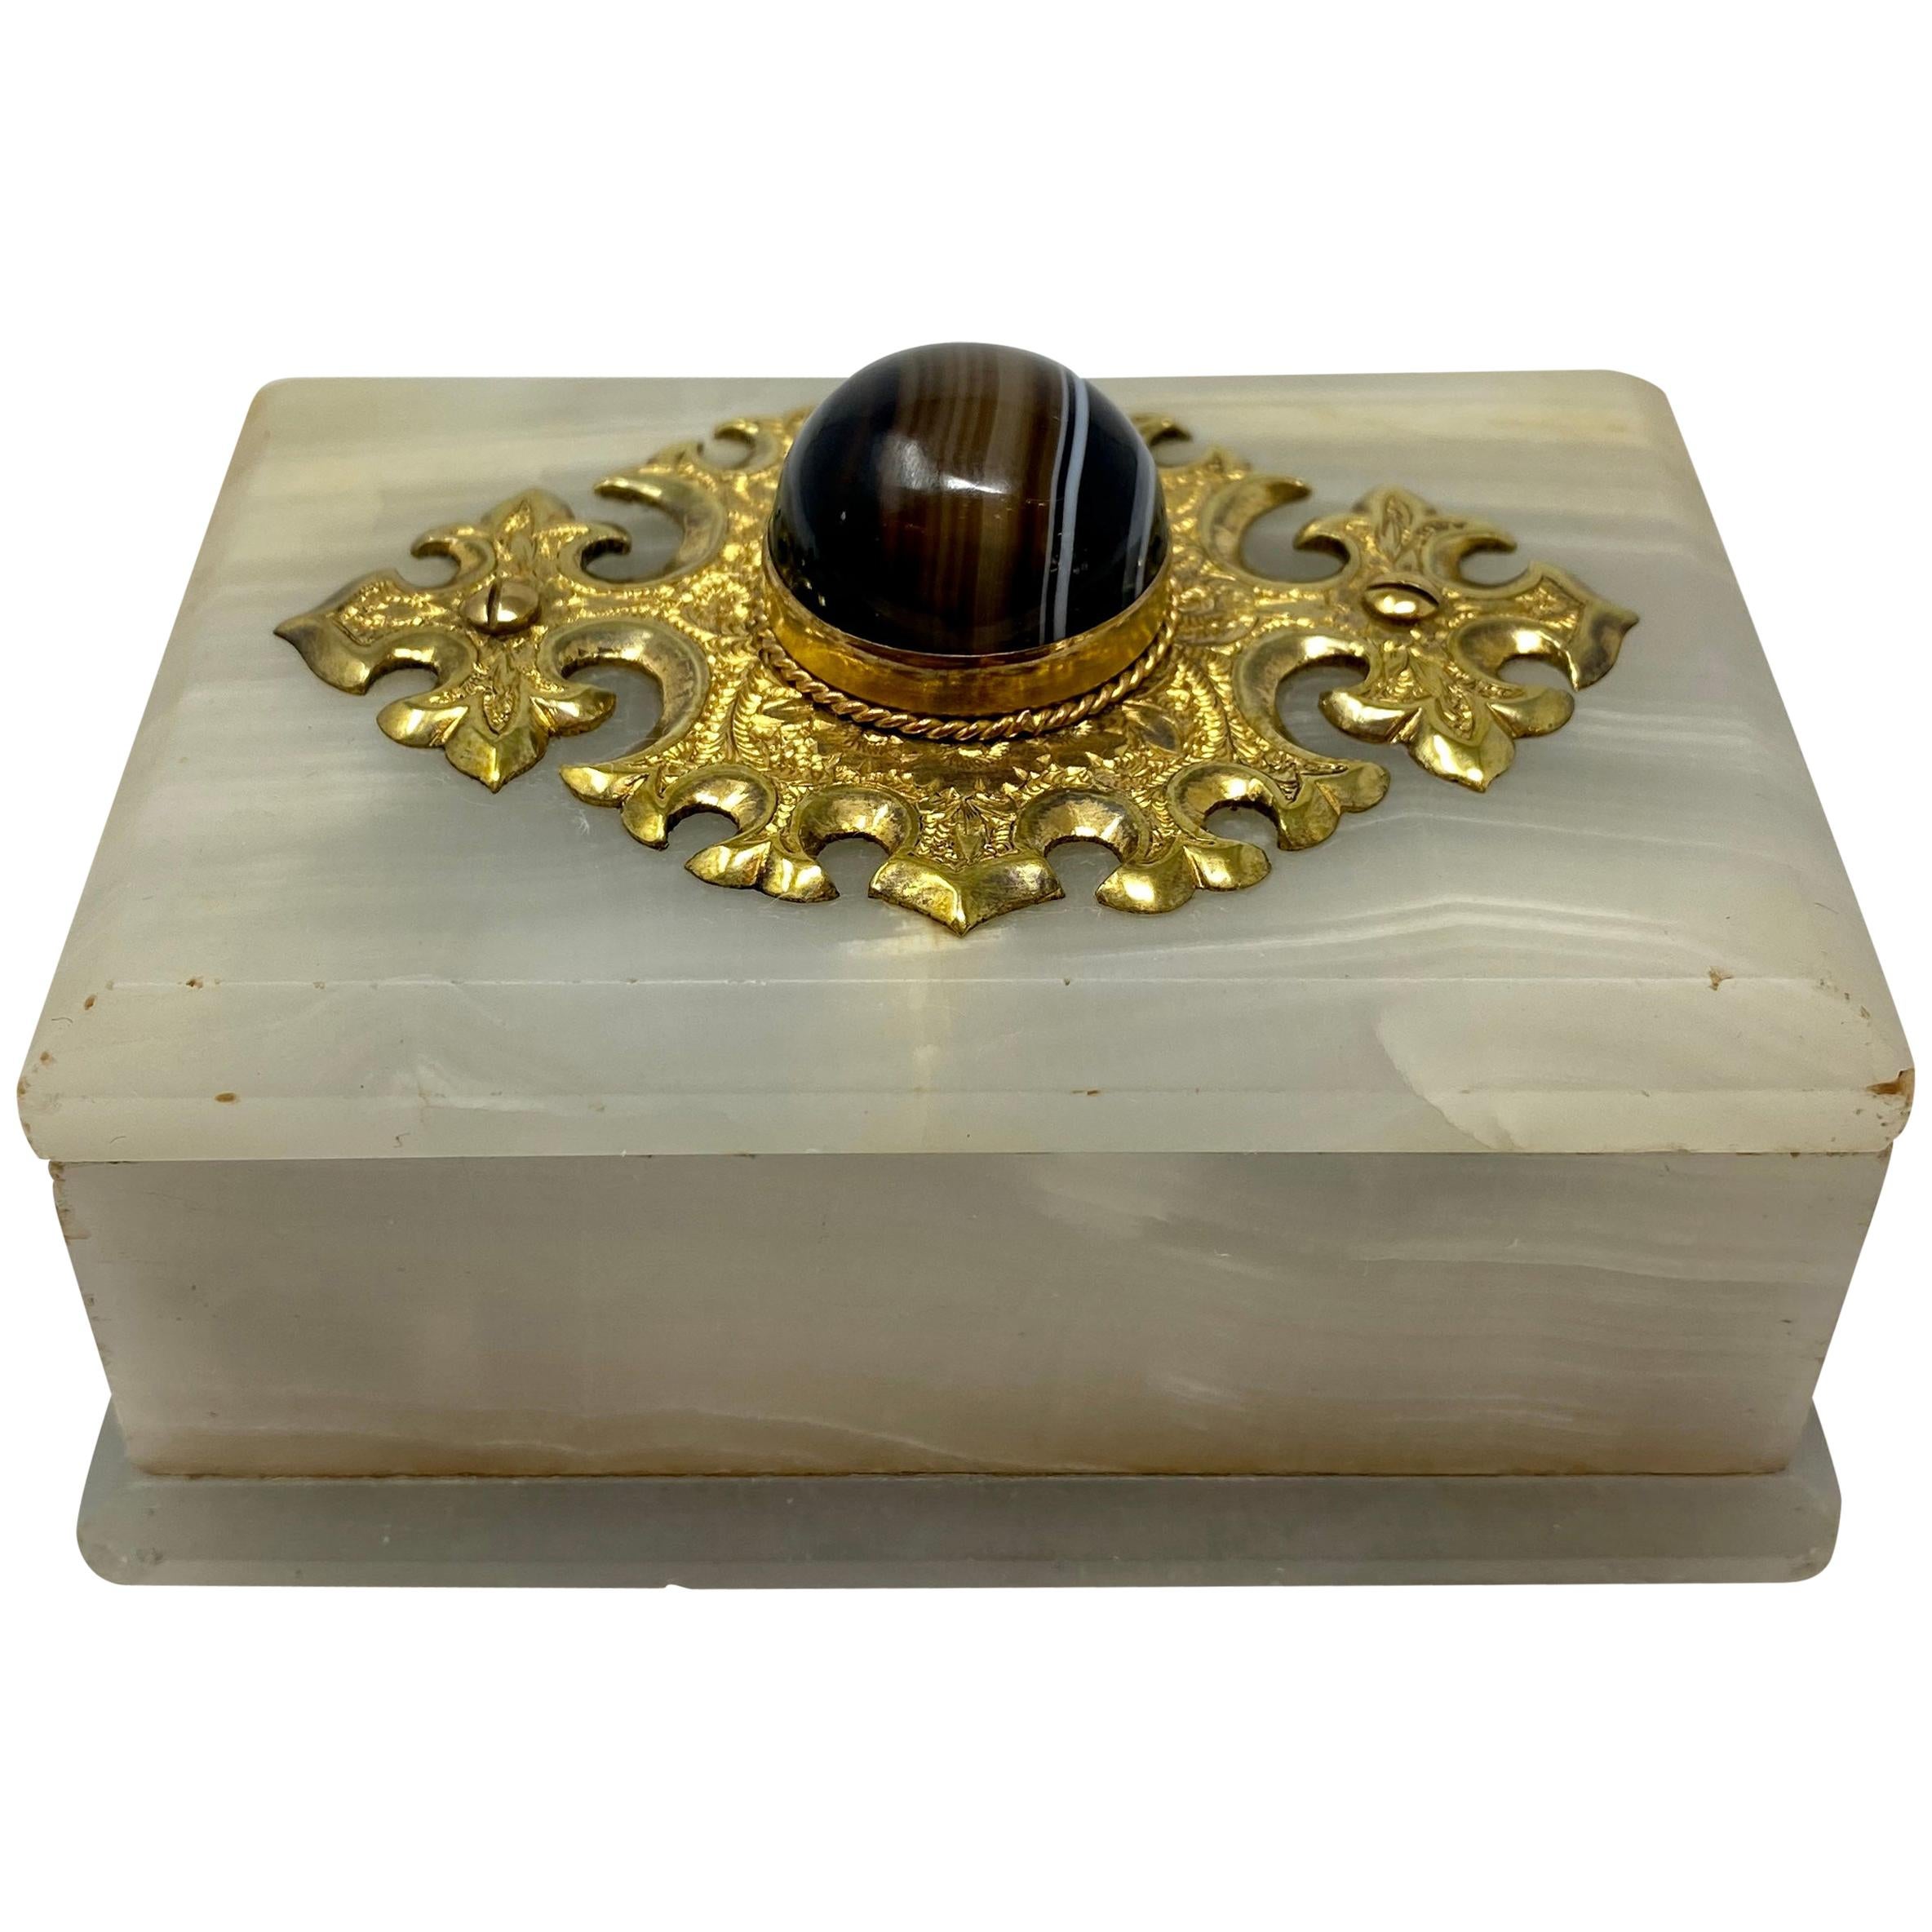 Antique Onyx and Bronze D'Ore Jewel Box Mounted with Banded Agate, circa 1890s